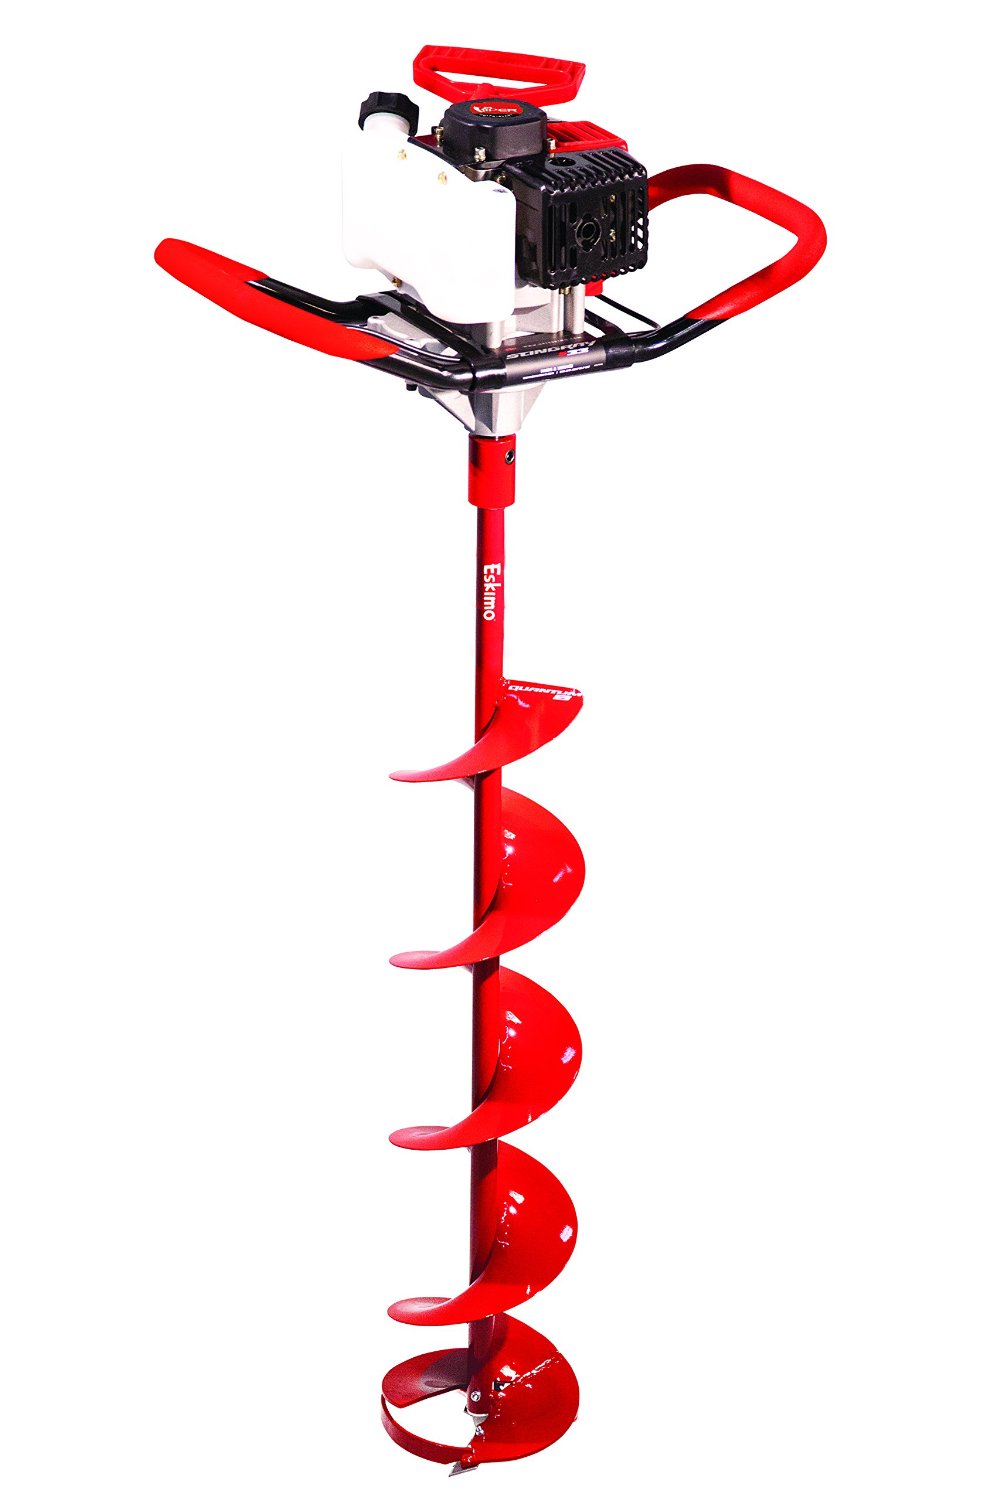 drill powered ice auger